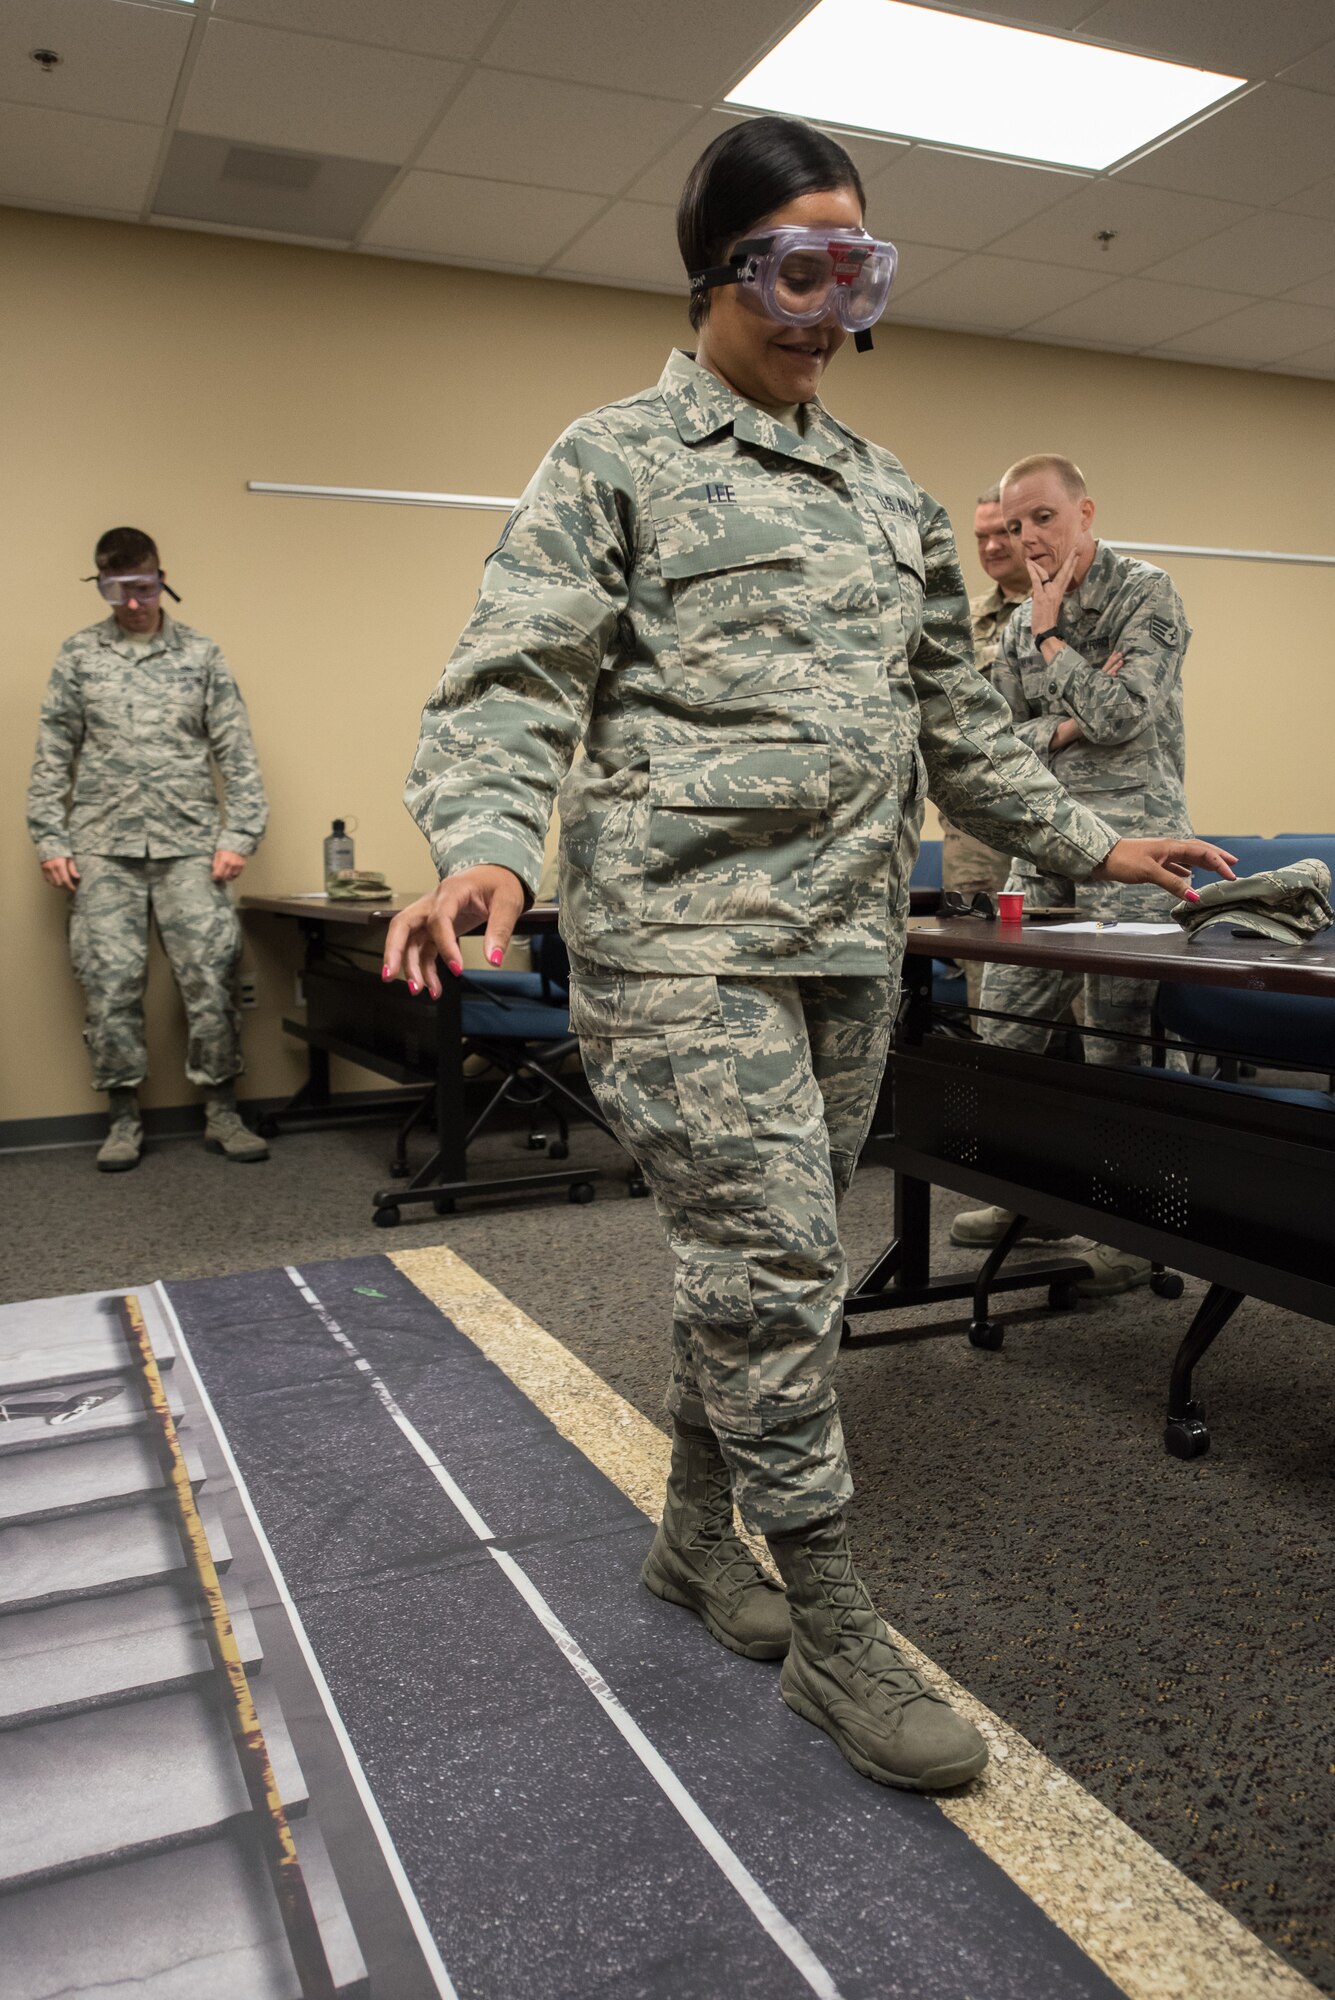 Staff Sgt. Erin Lee, a command support specialist in the Kentucky Air National Guard’s 123rd Airlift Wing, participates in a wellness class while wearing goggles to mimic the effects of alcohol impairment May 19, 2019, in Savannah, Ga. The class was part of Maintenance University, a four-day event held at the Combat Readiness Training Center from May 19 to 22.